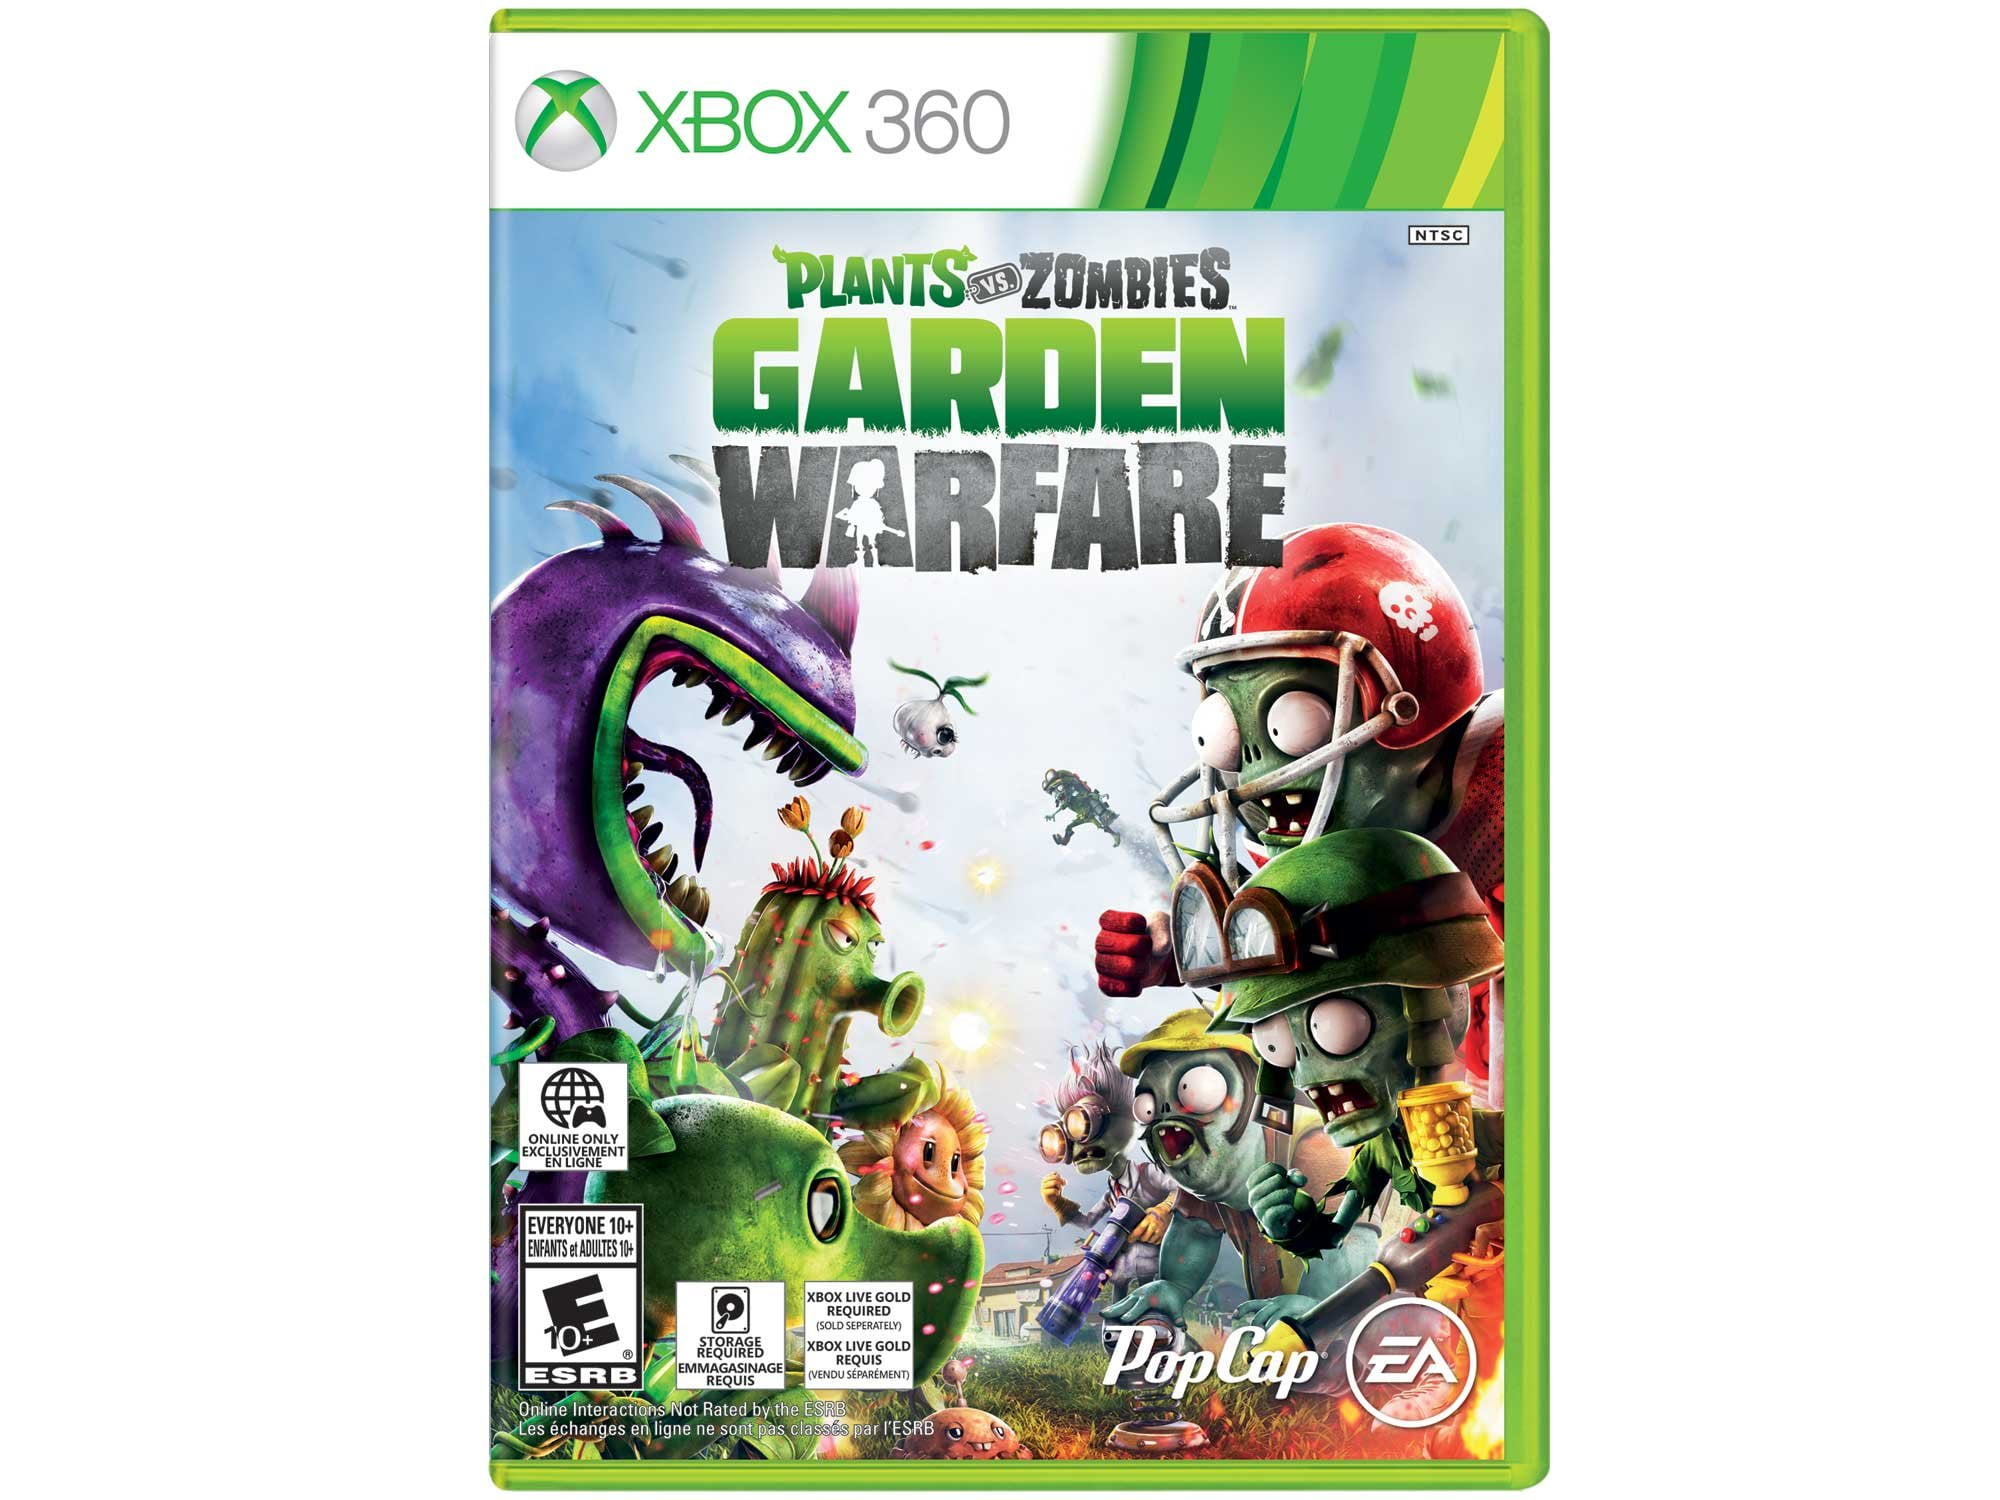 Plants vs. Zombies Review - Plants vs. Zombies Review: Xbox 360 Version  Provides Lawn Defense For Two - Game Informer